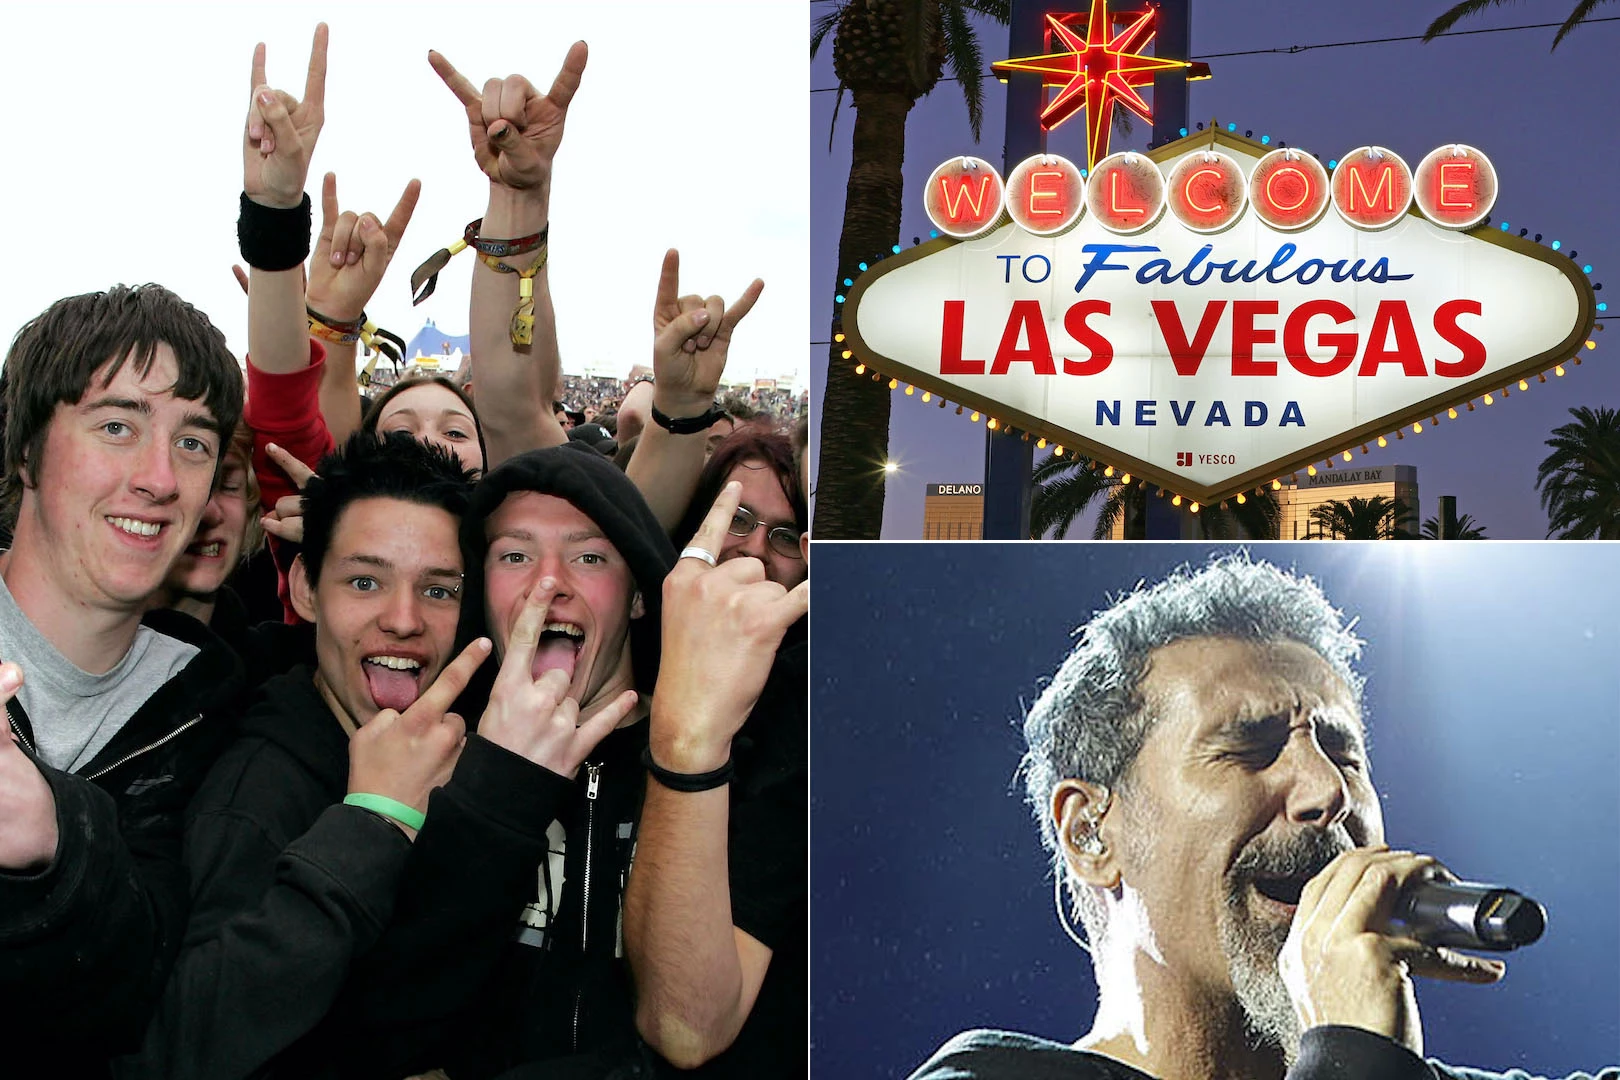 Things for Rock + Metal Fans to Do in Las Vegas